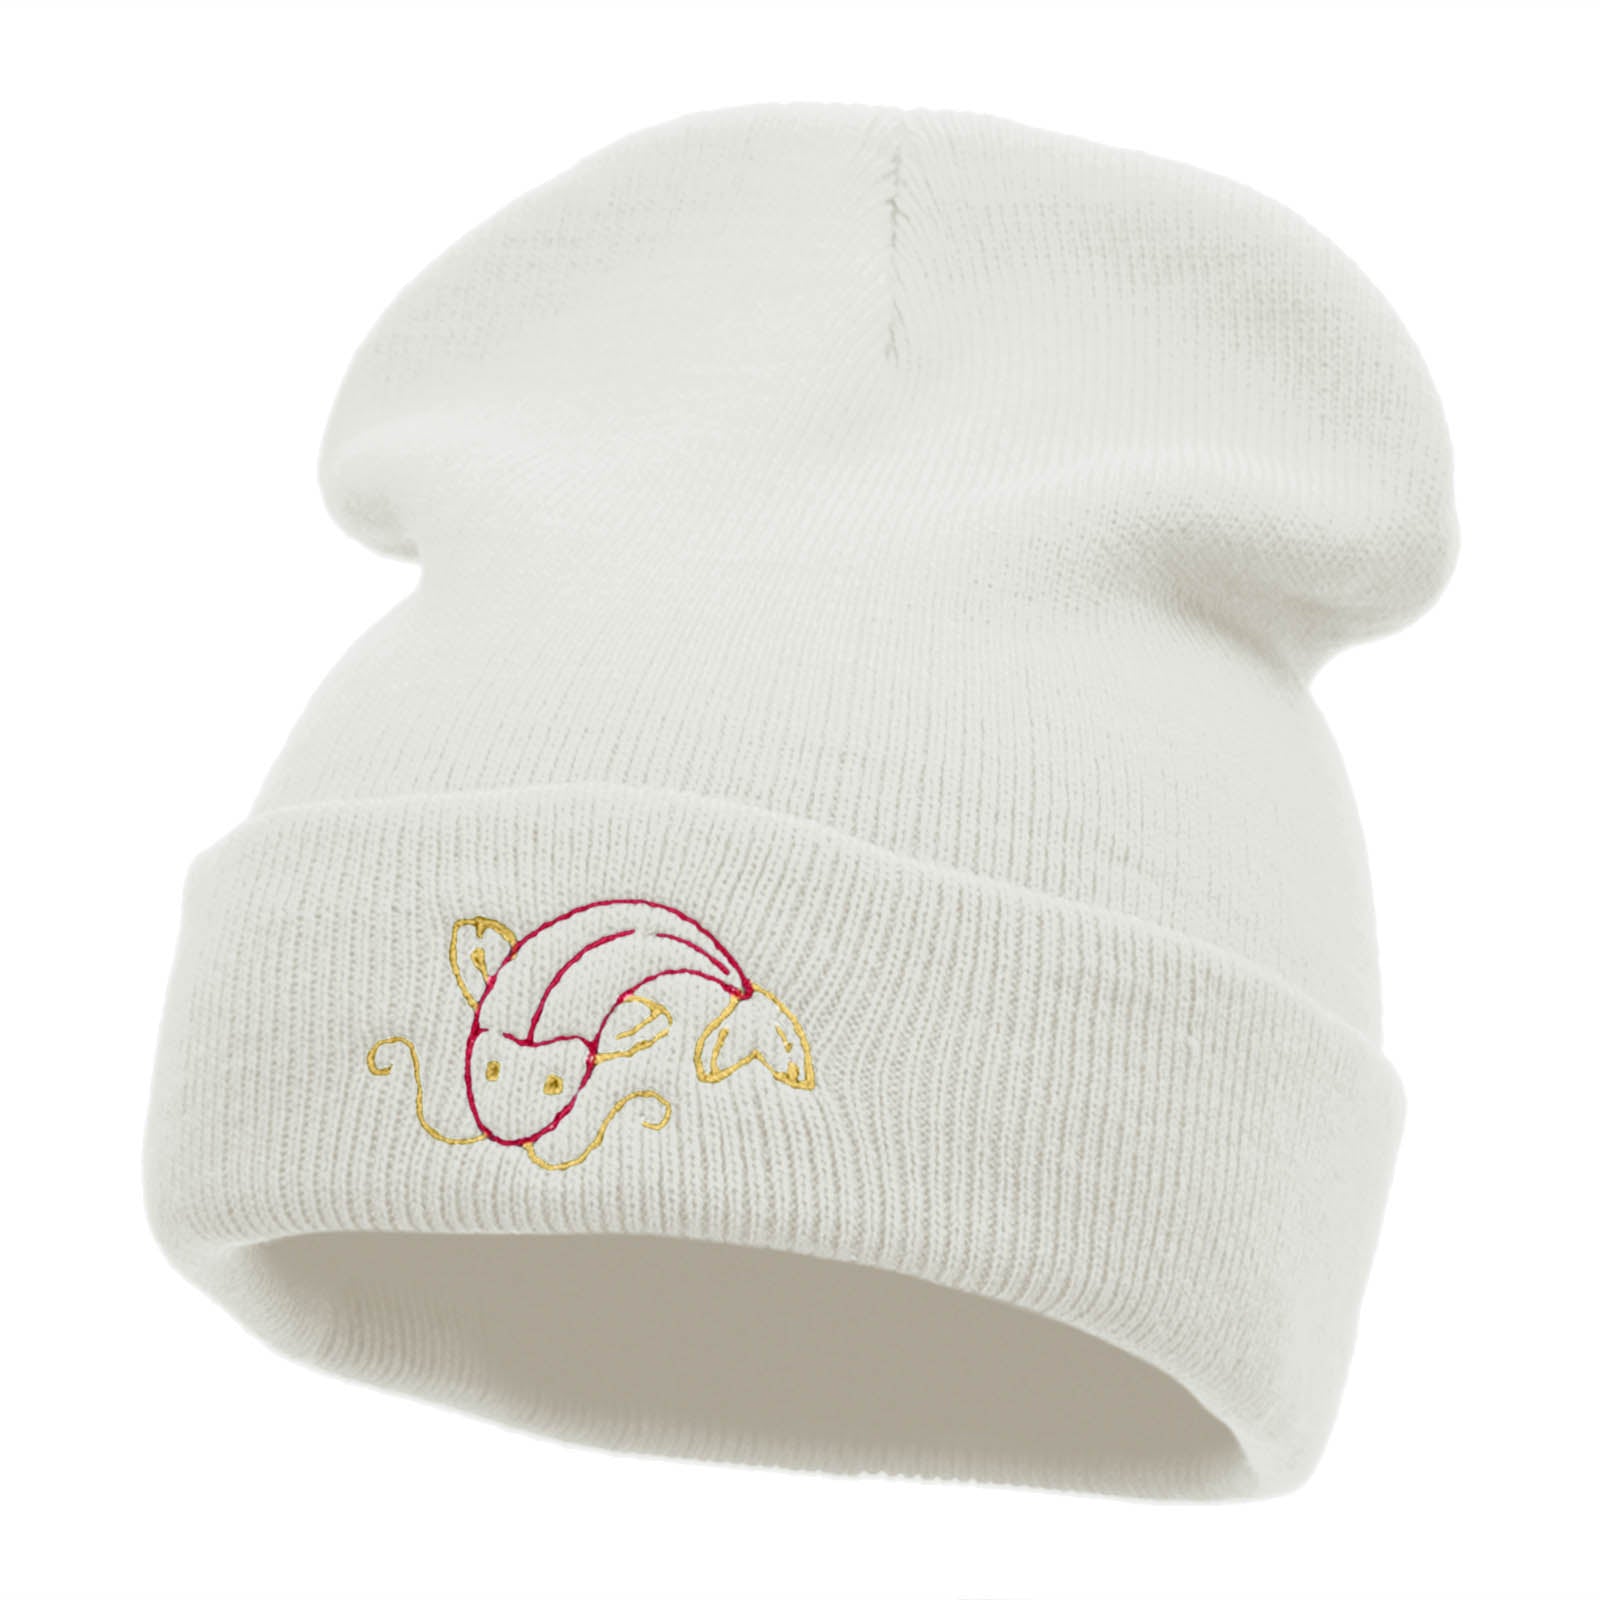 Koi Fish Embroidered 12 Inch Long Knitted Beanie - White OSFM